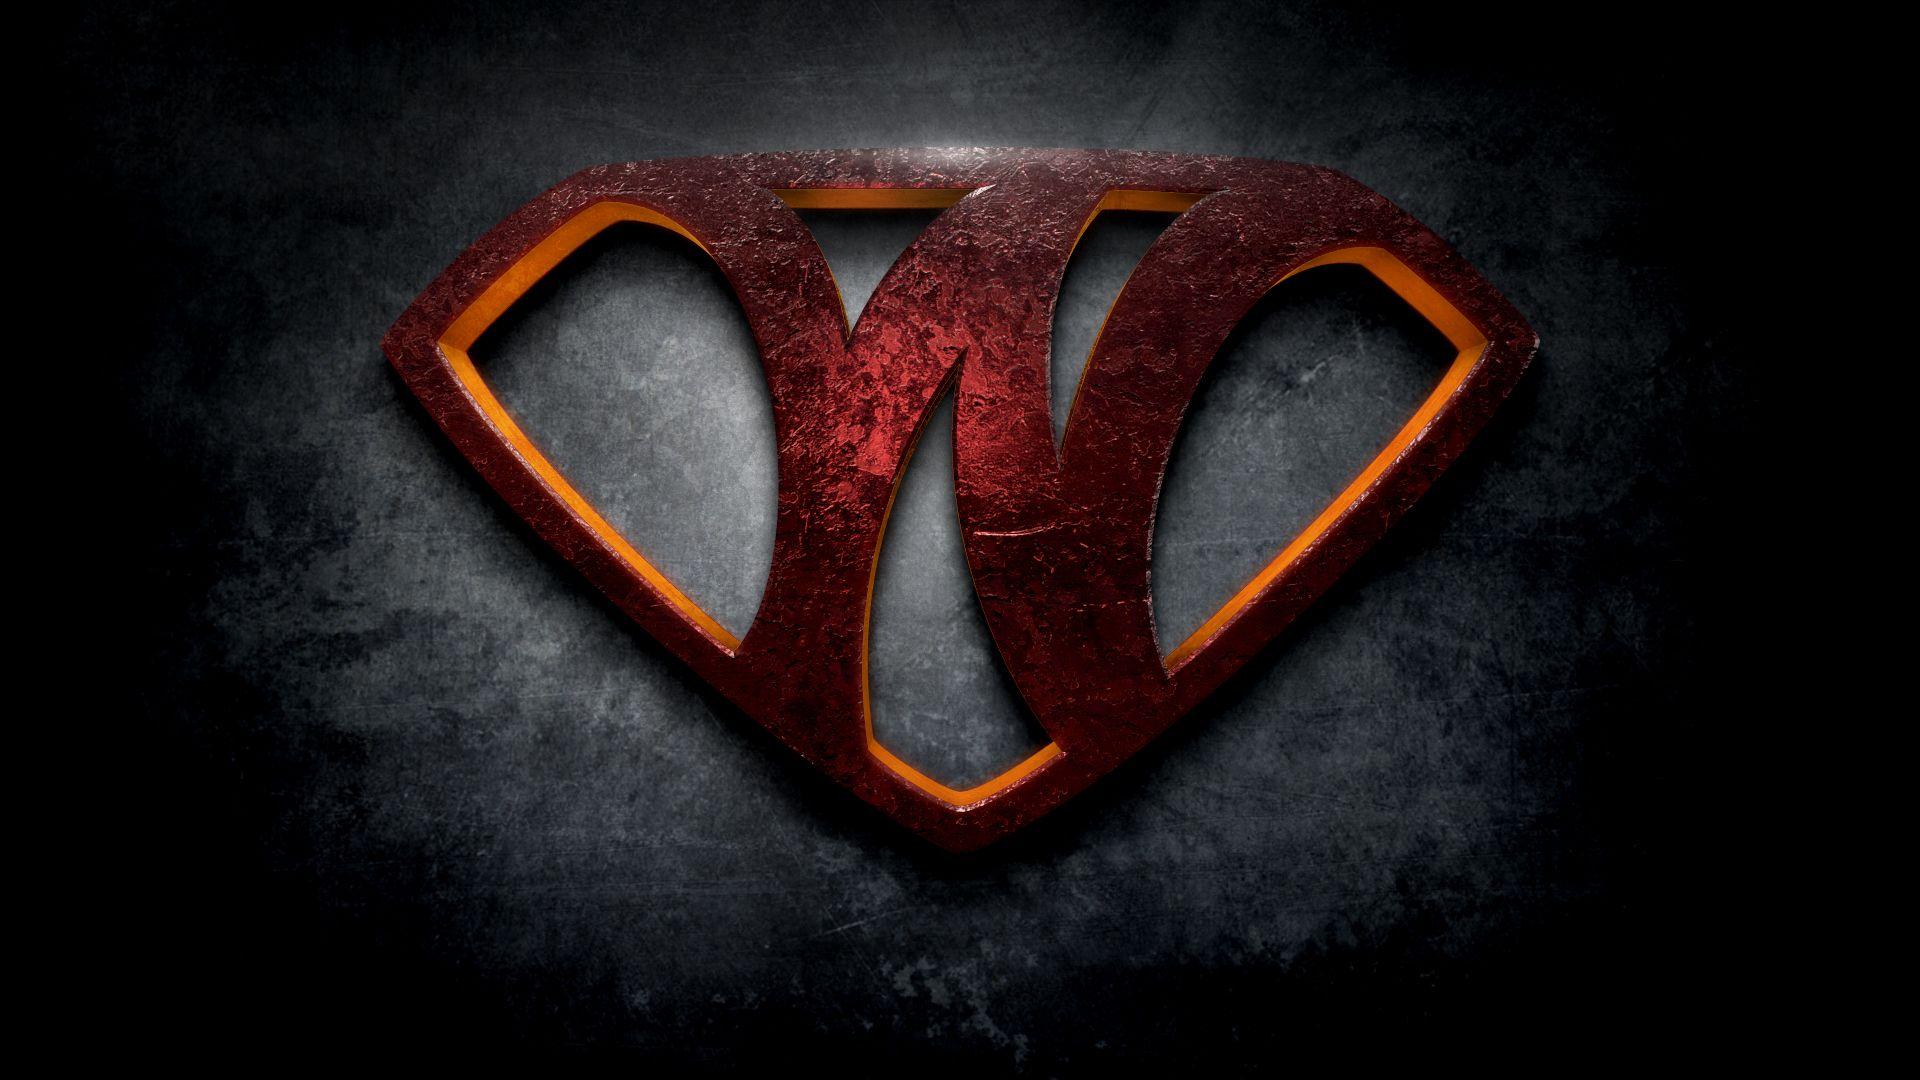 The letter W in the style of “Man of Steel”